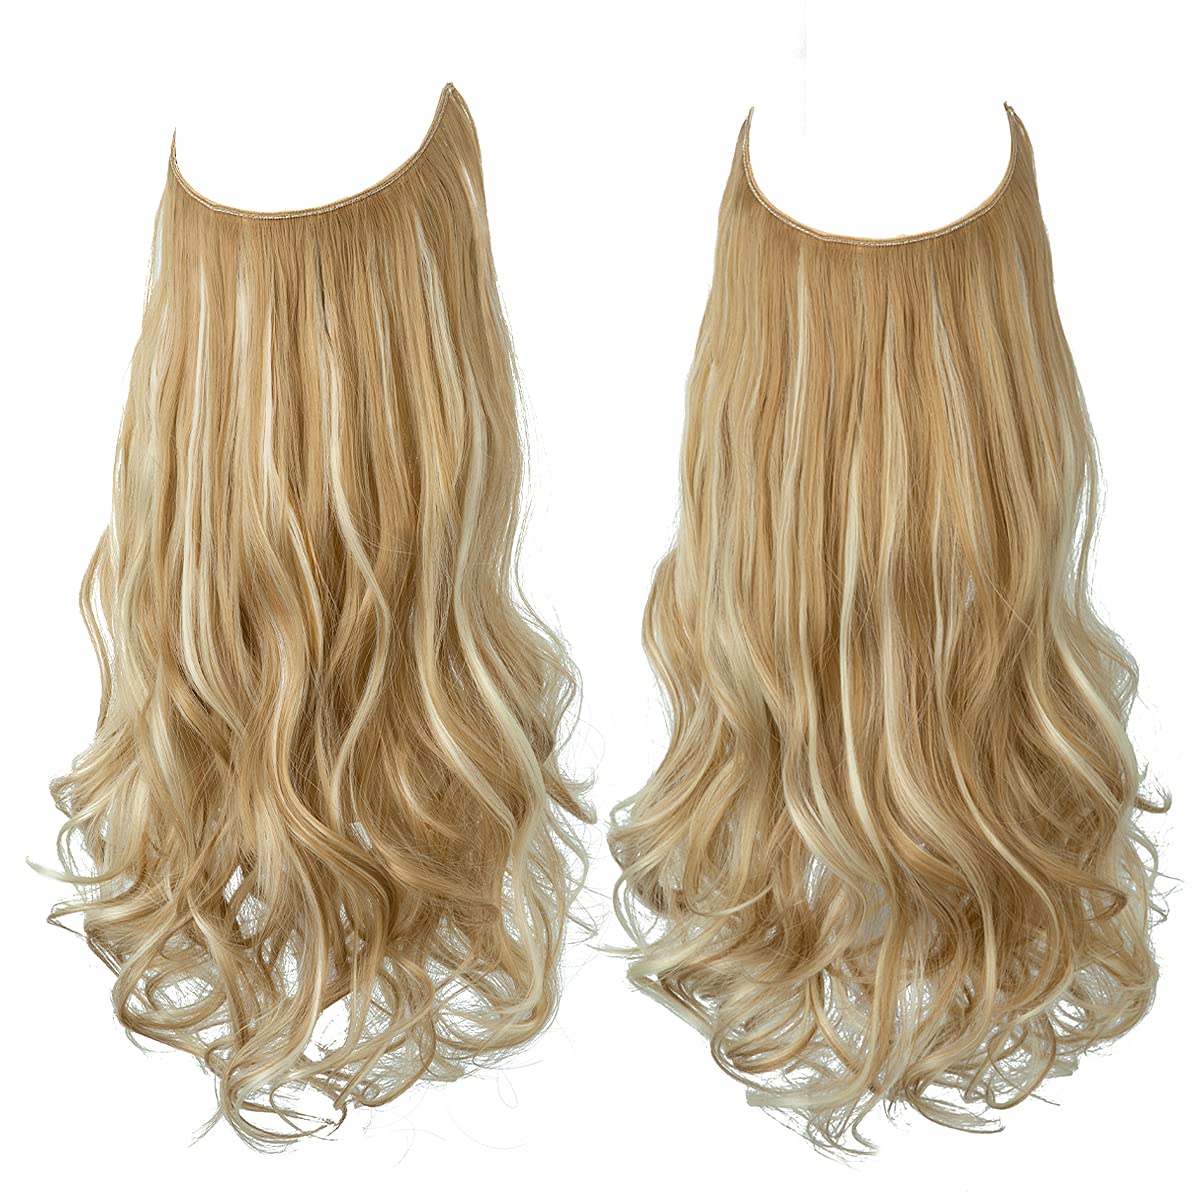 Hair4Her™ High Quality Haar Extensions